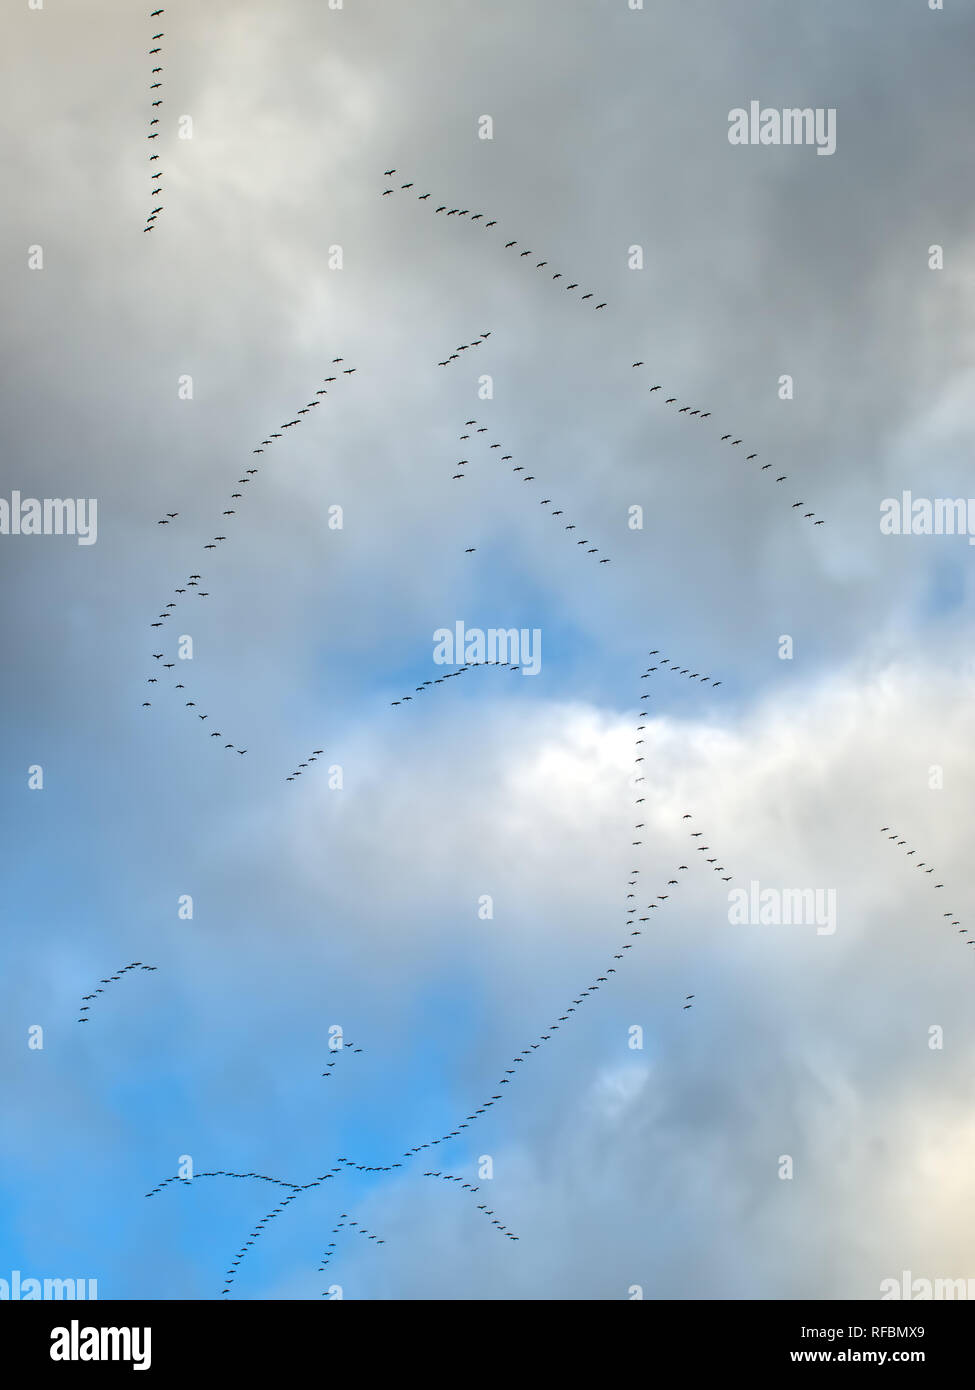 Several formations of migratory birds on a cloudy sky. Stock Photo